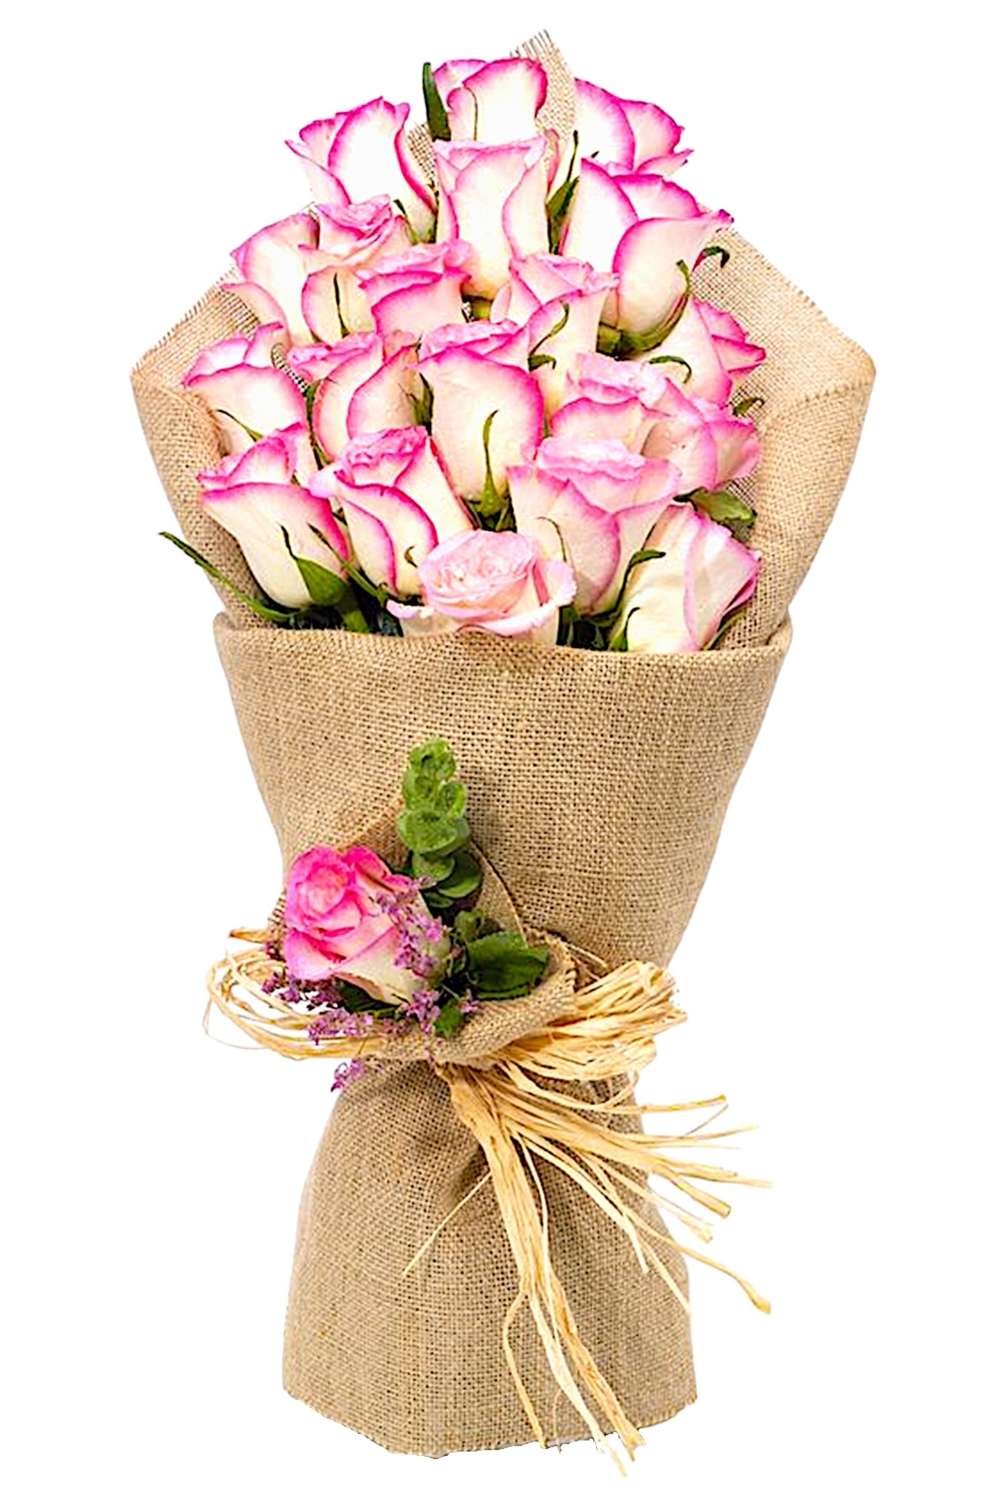 Surprise them with a beautiful bunch of bi-color pink roses.
A bouquet of